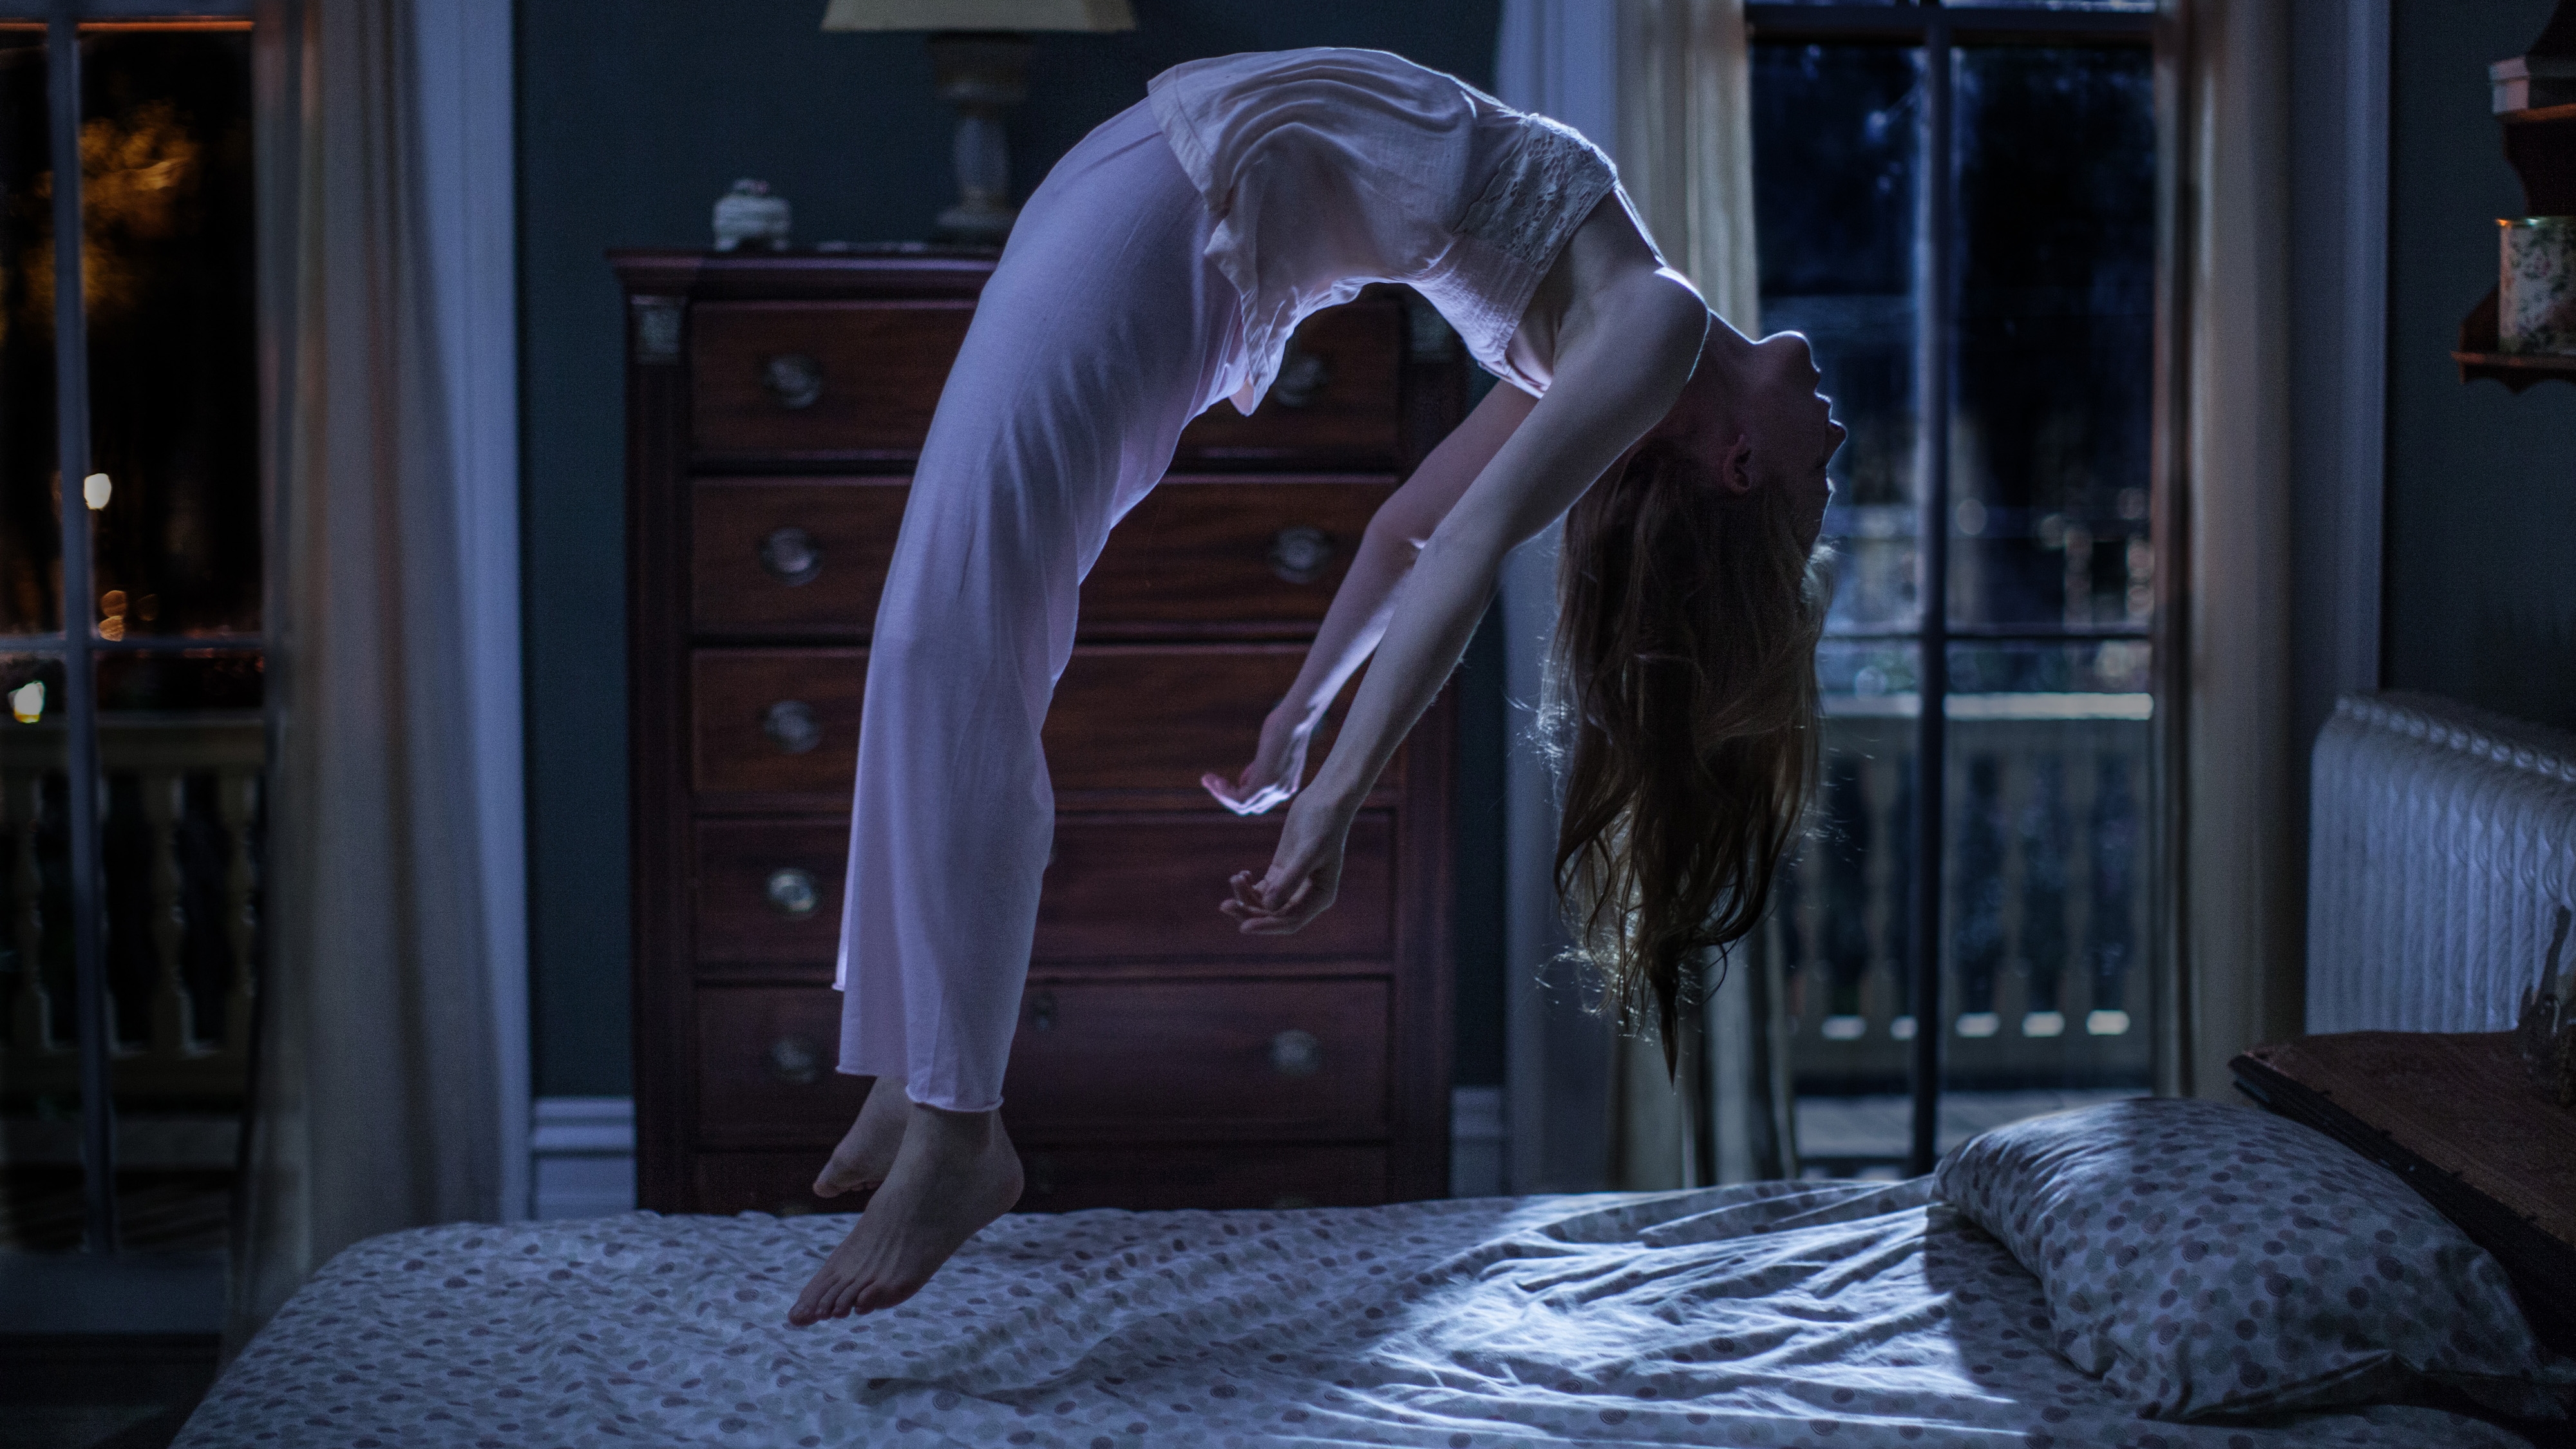 Movie The Last Exorcism Part II HD Wallpaper | Background Image